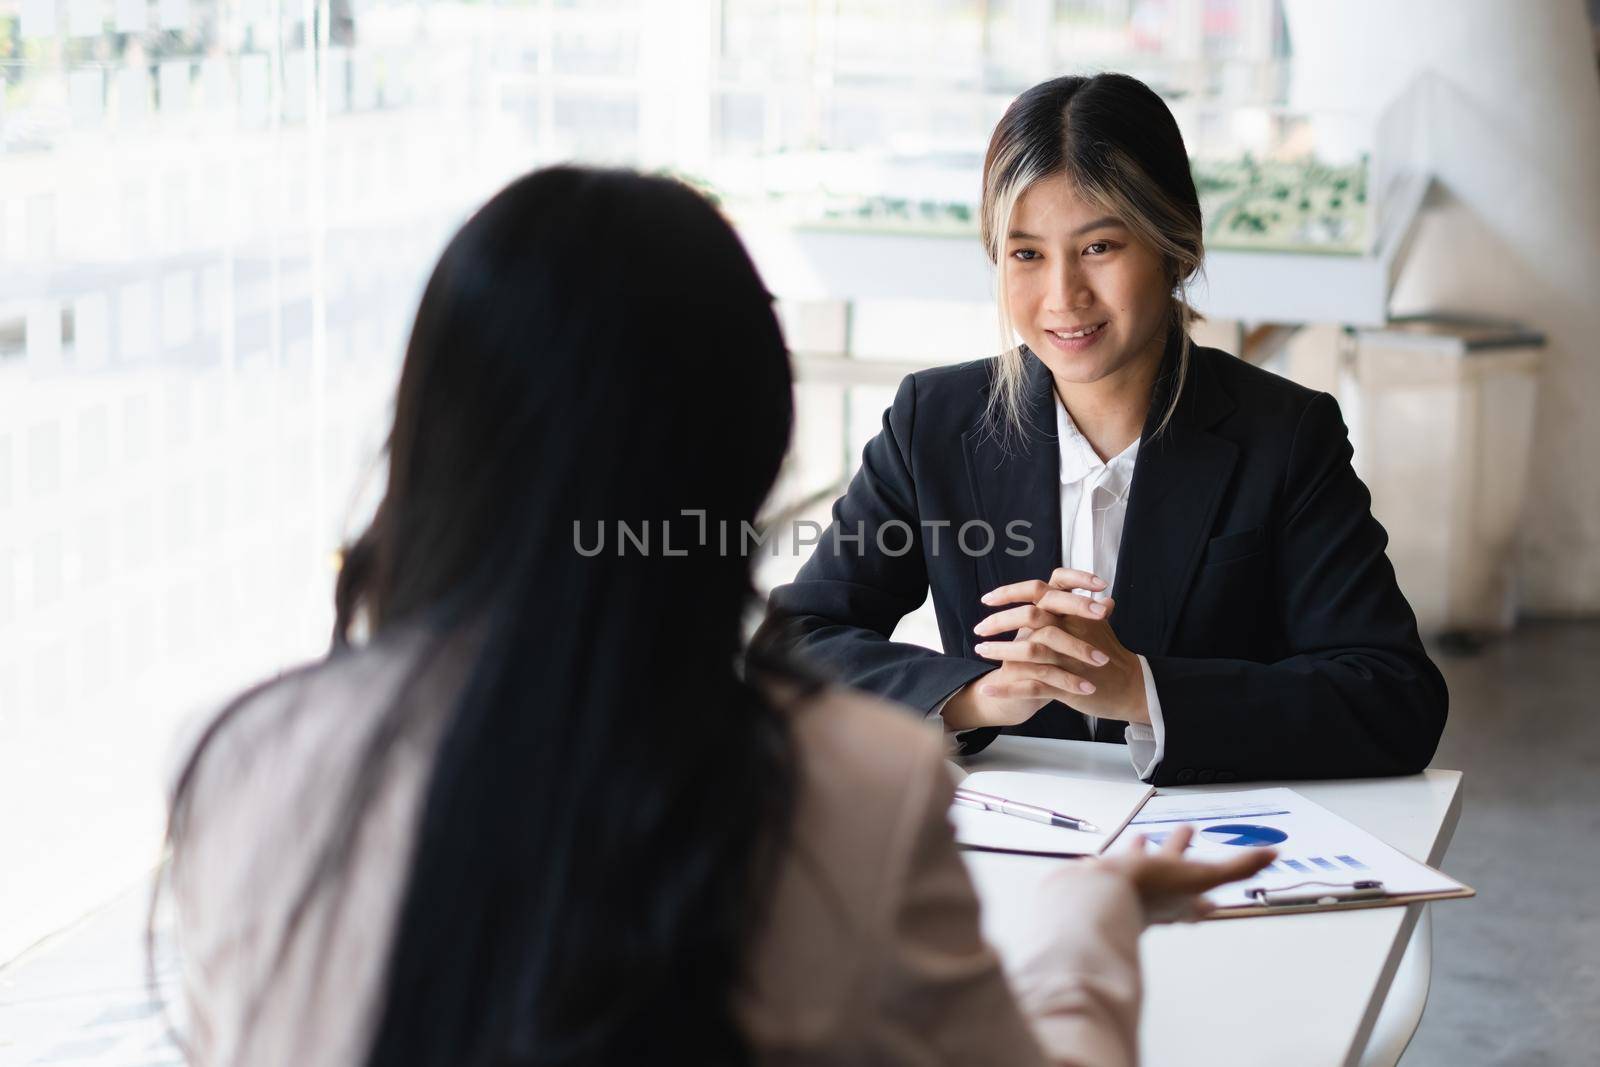 During a job interview, HR managers look for a good new employee. Manager have positive first impression of candidate